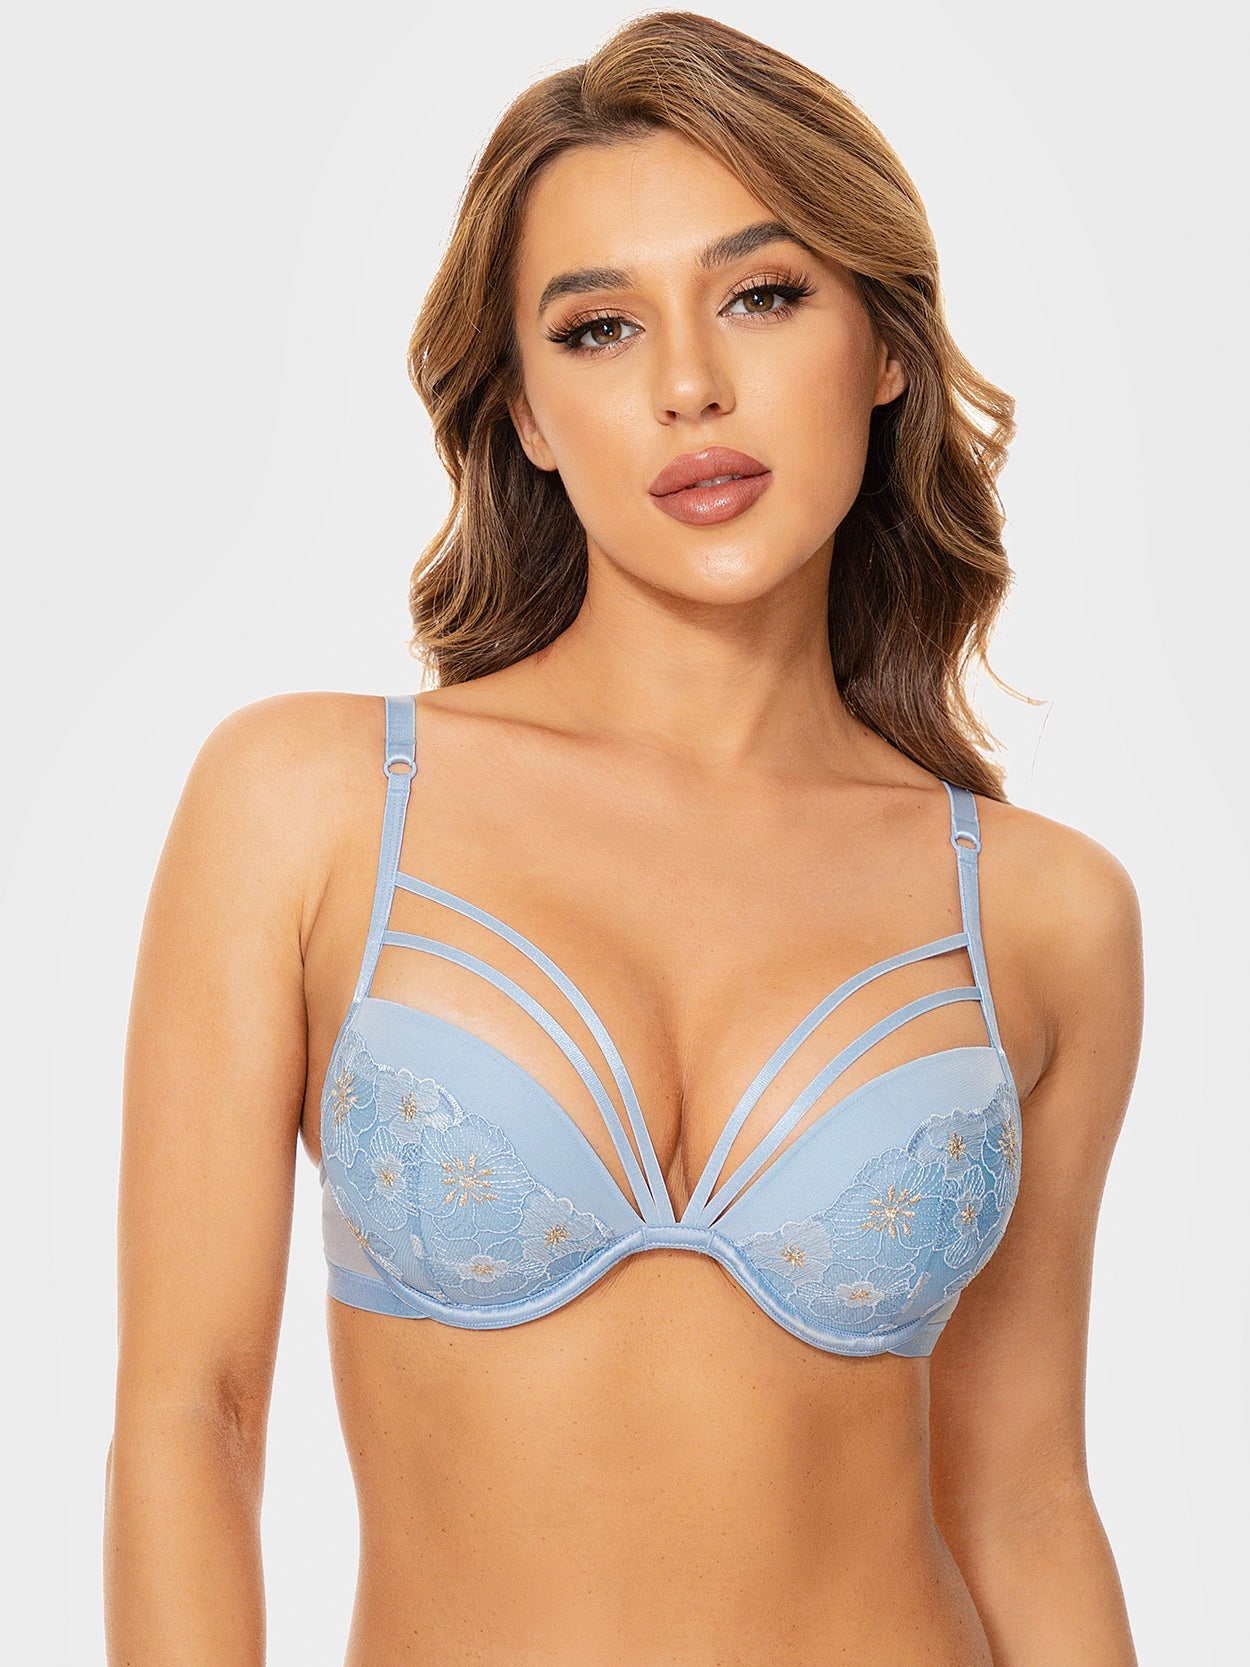 Lace Push Up Bra Padded Strappy Back Underwire